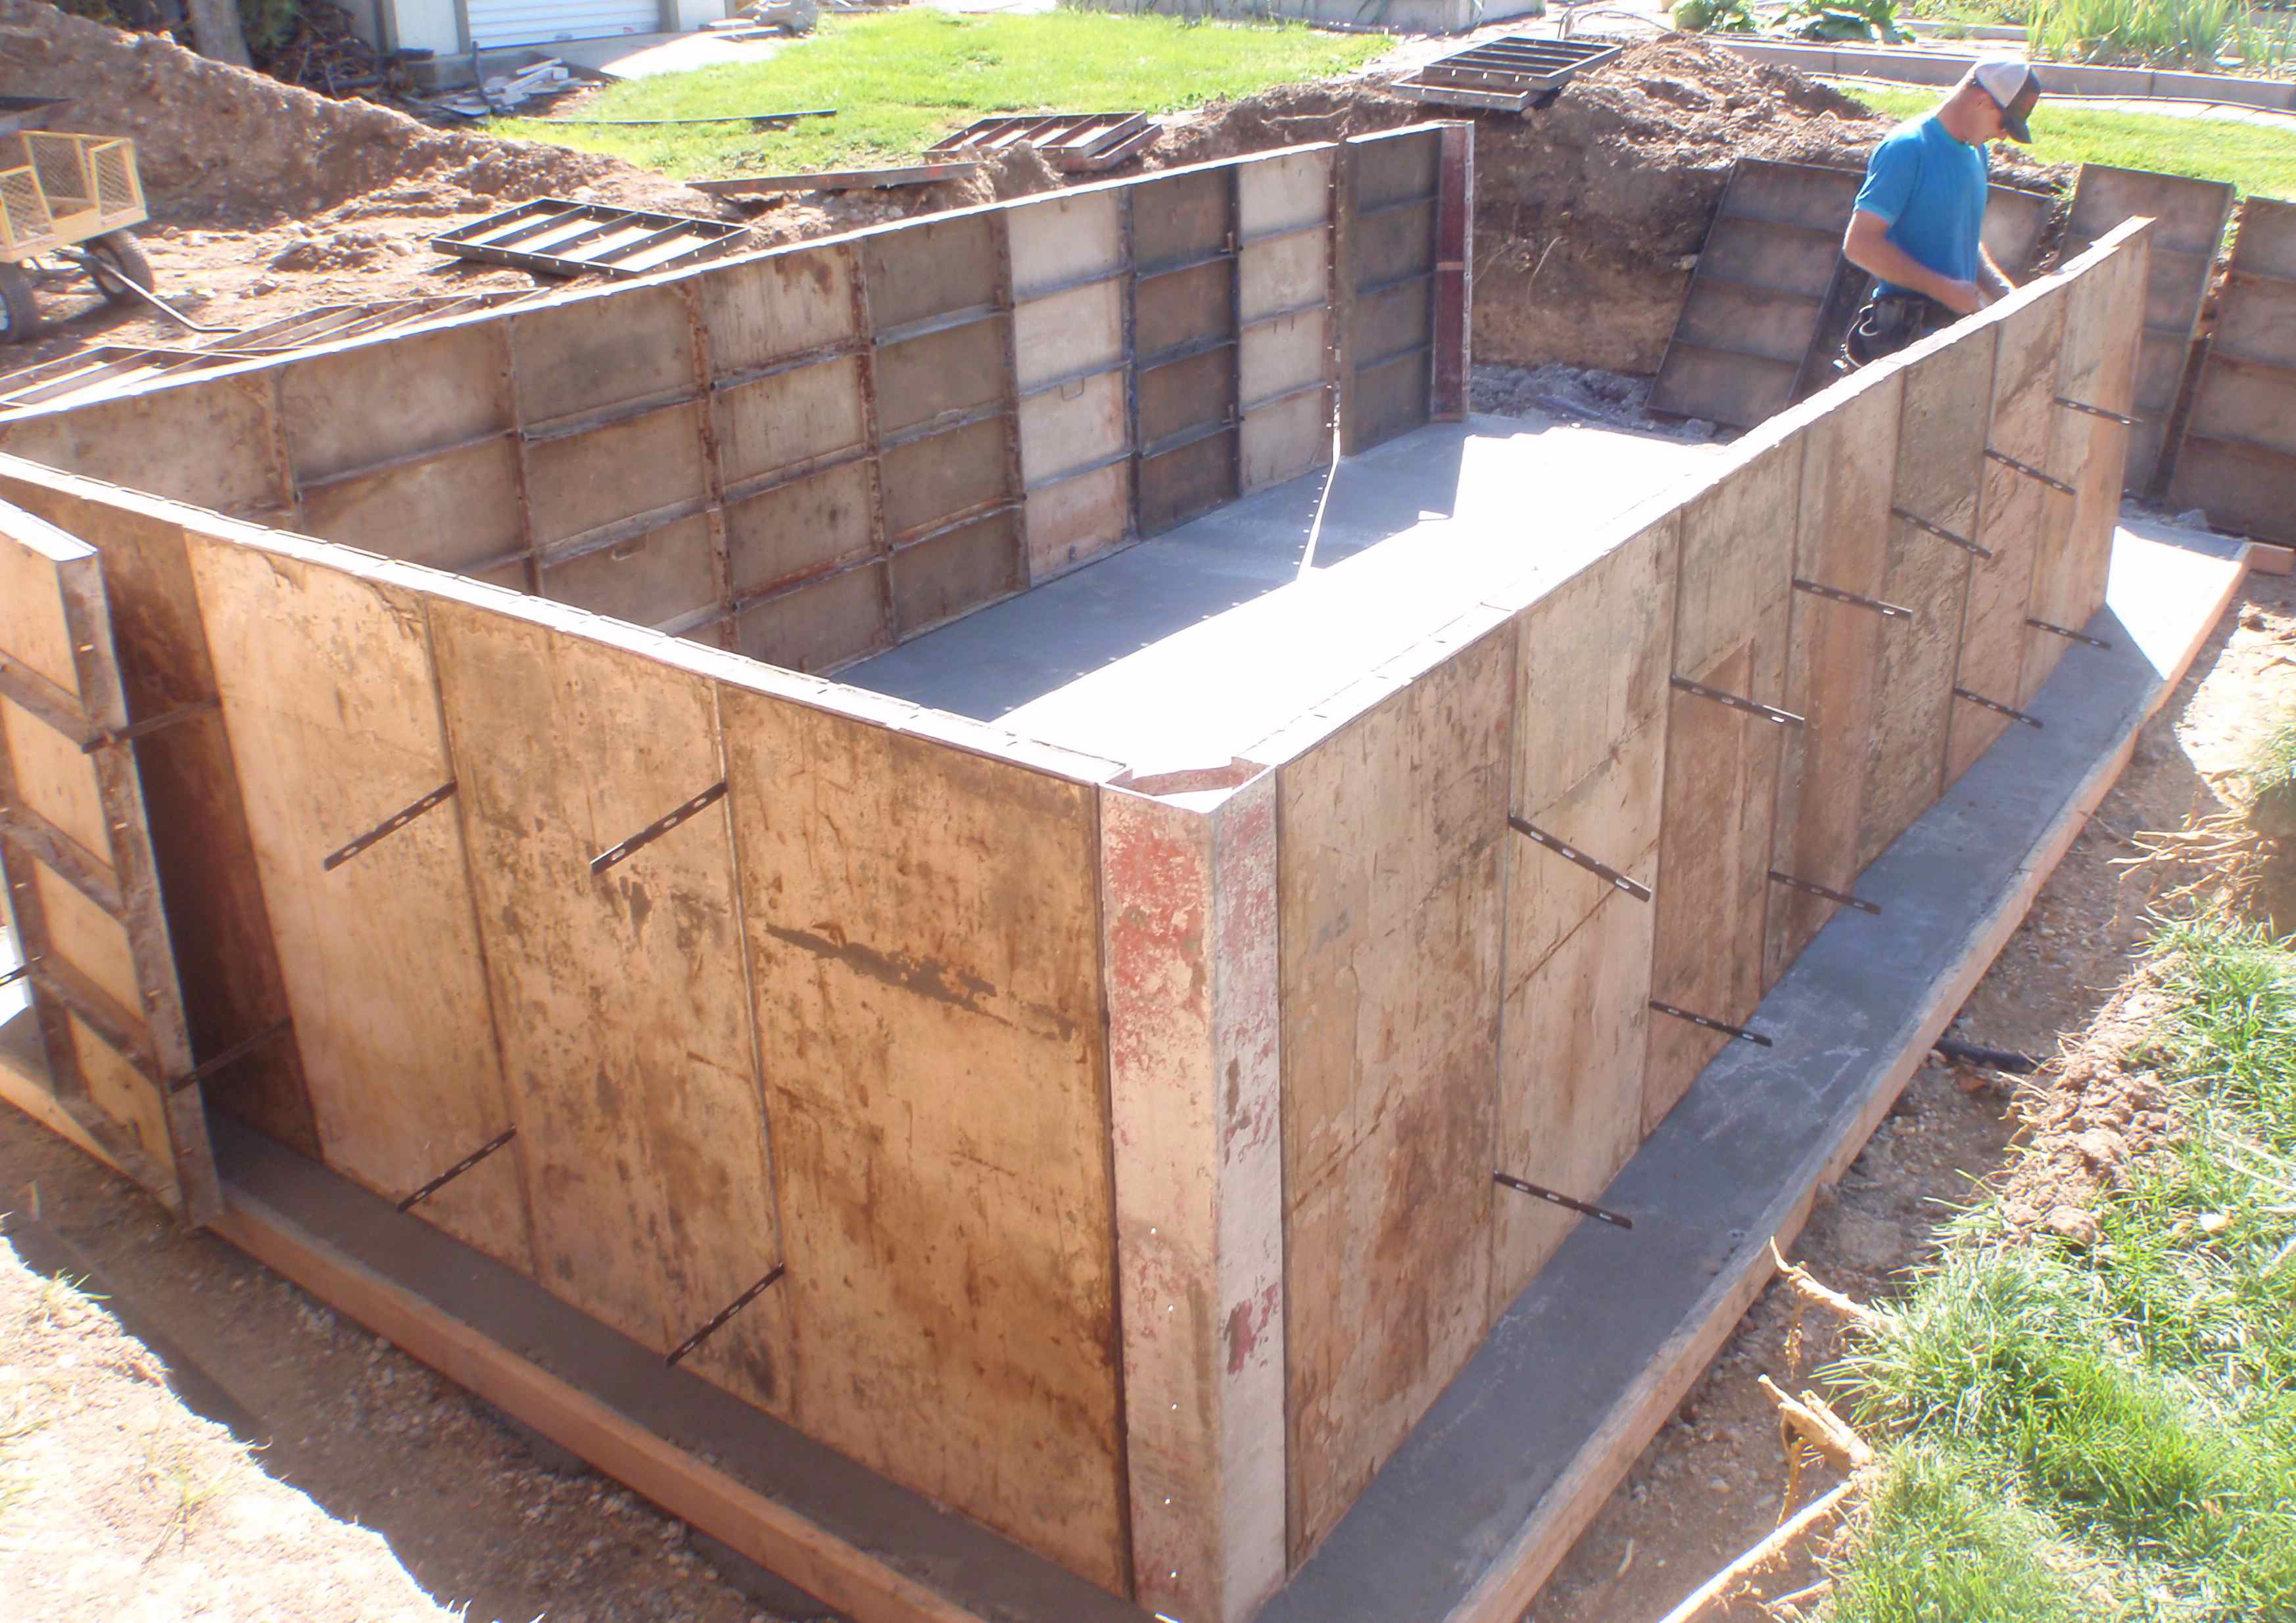 Putting in a Swimming Pool for Triathlon Training – The Cement Box